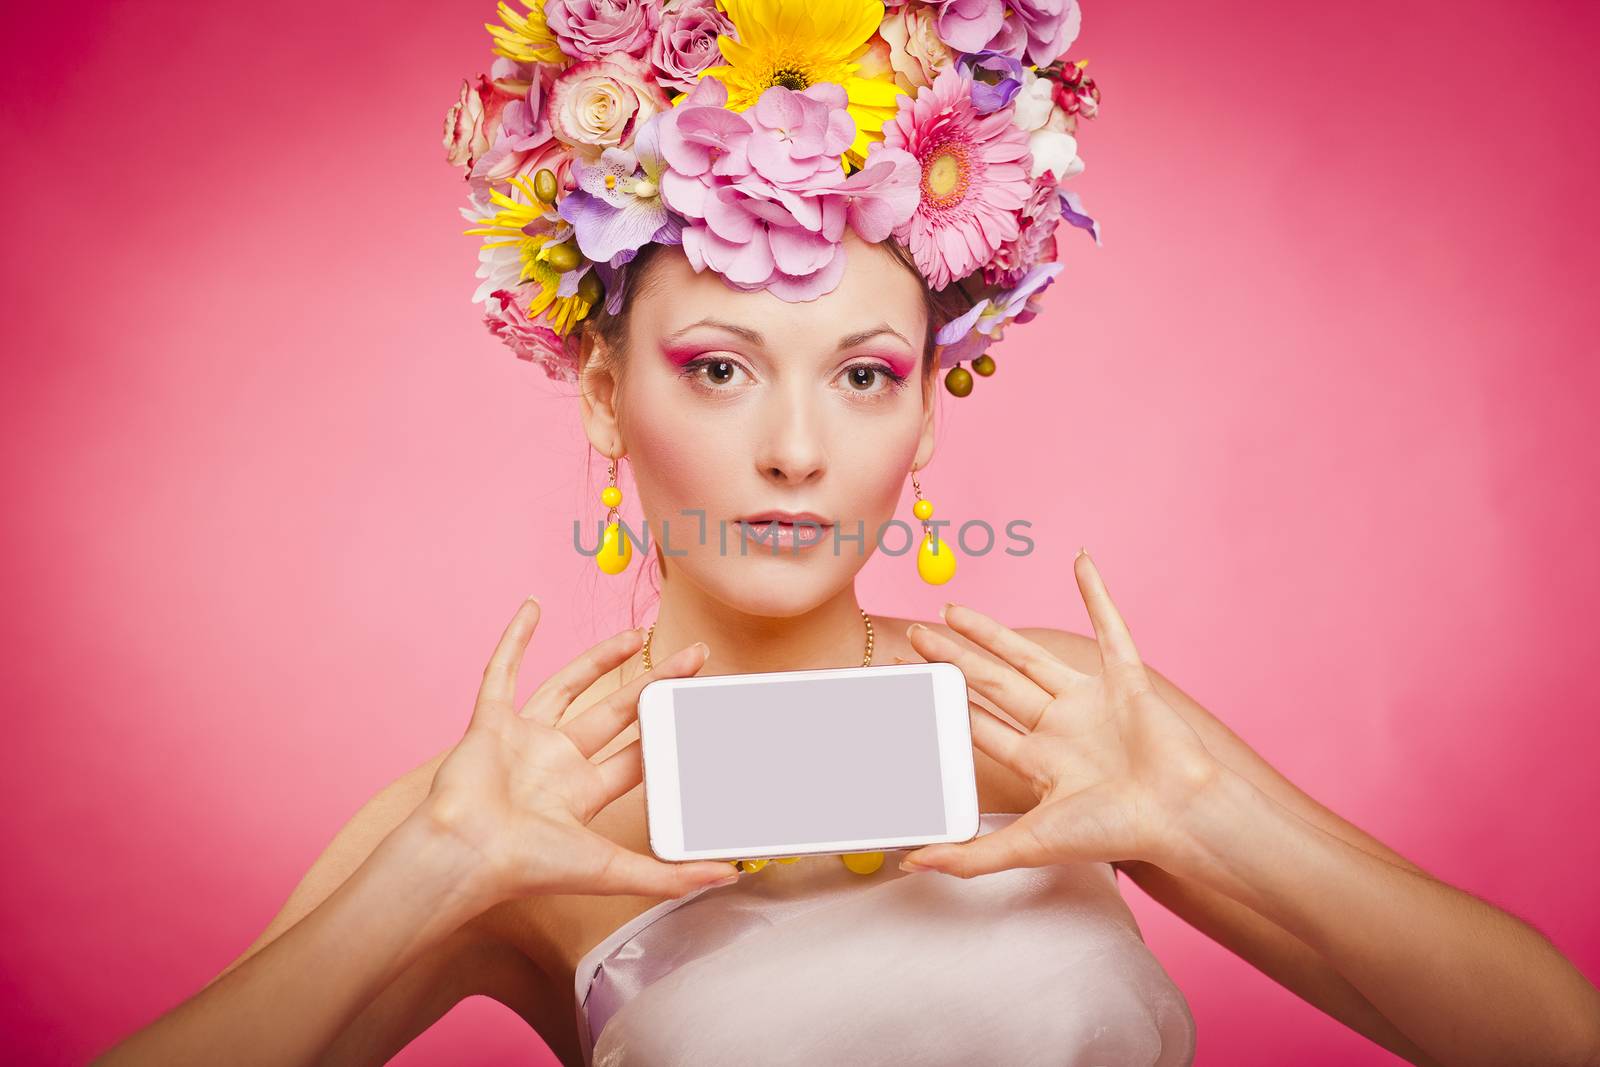 Woman showing a cell phone screen on a pink background